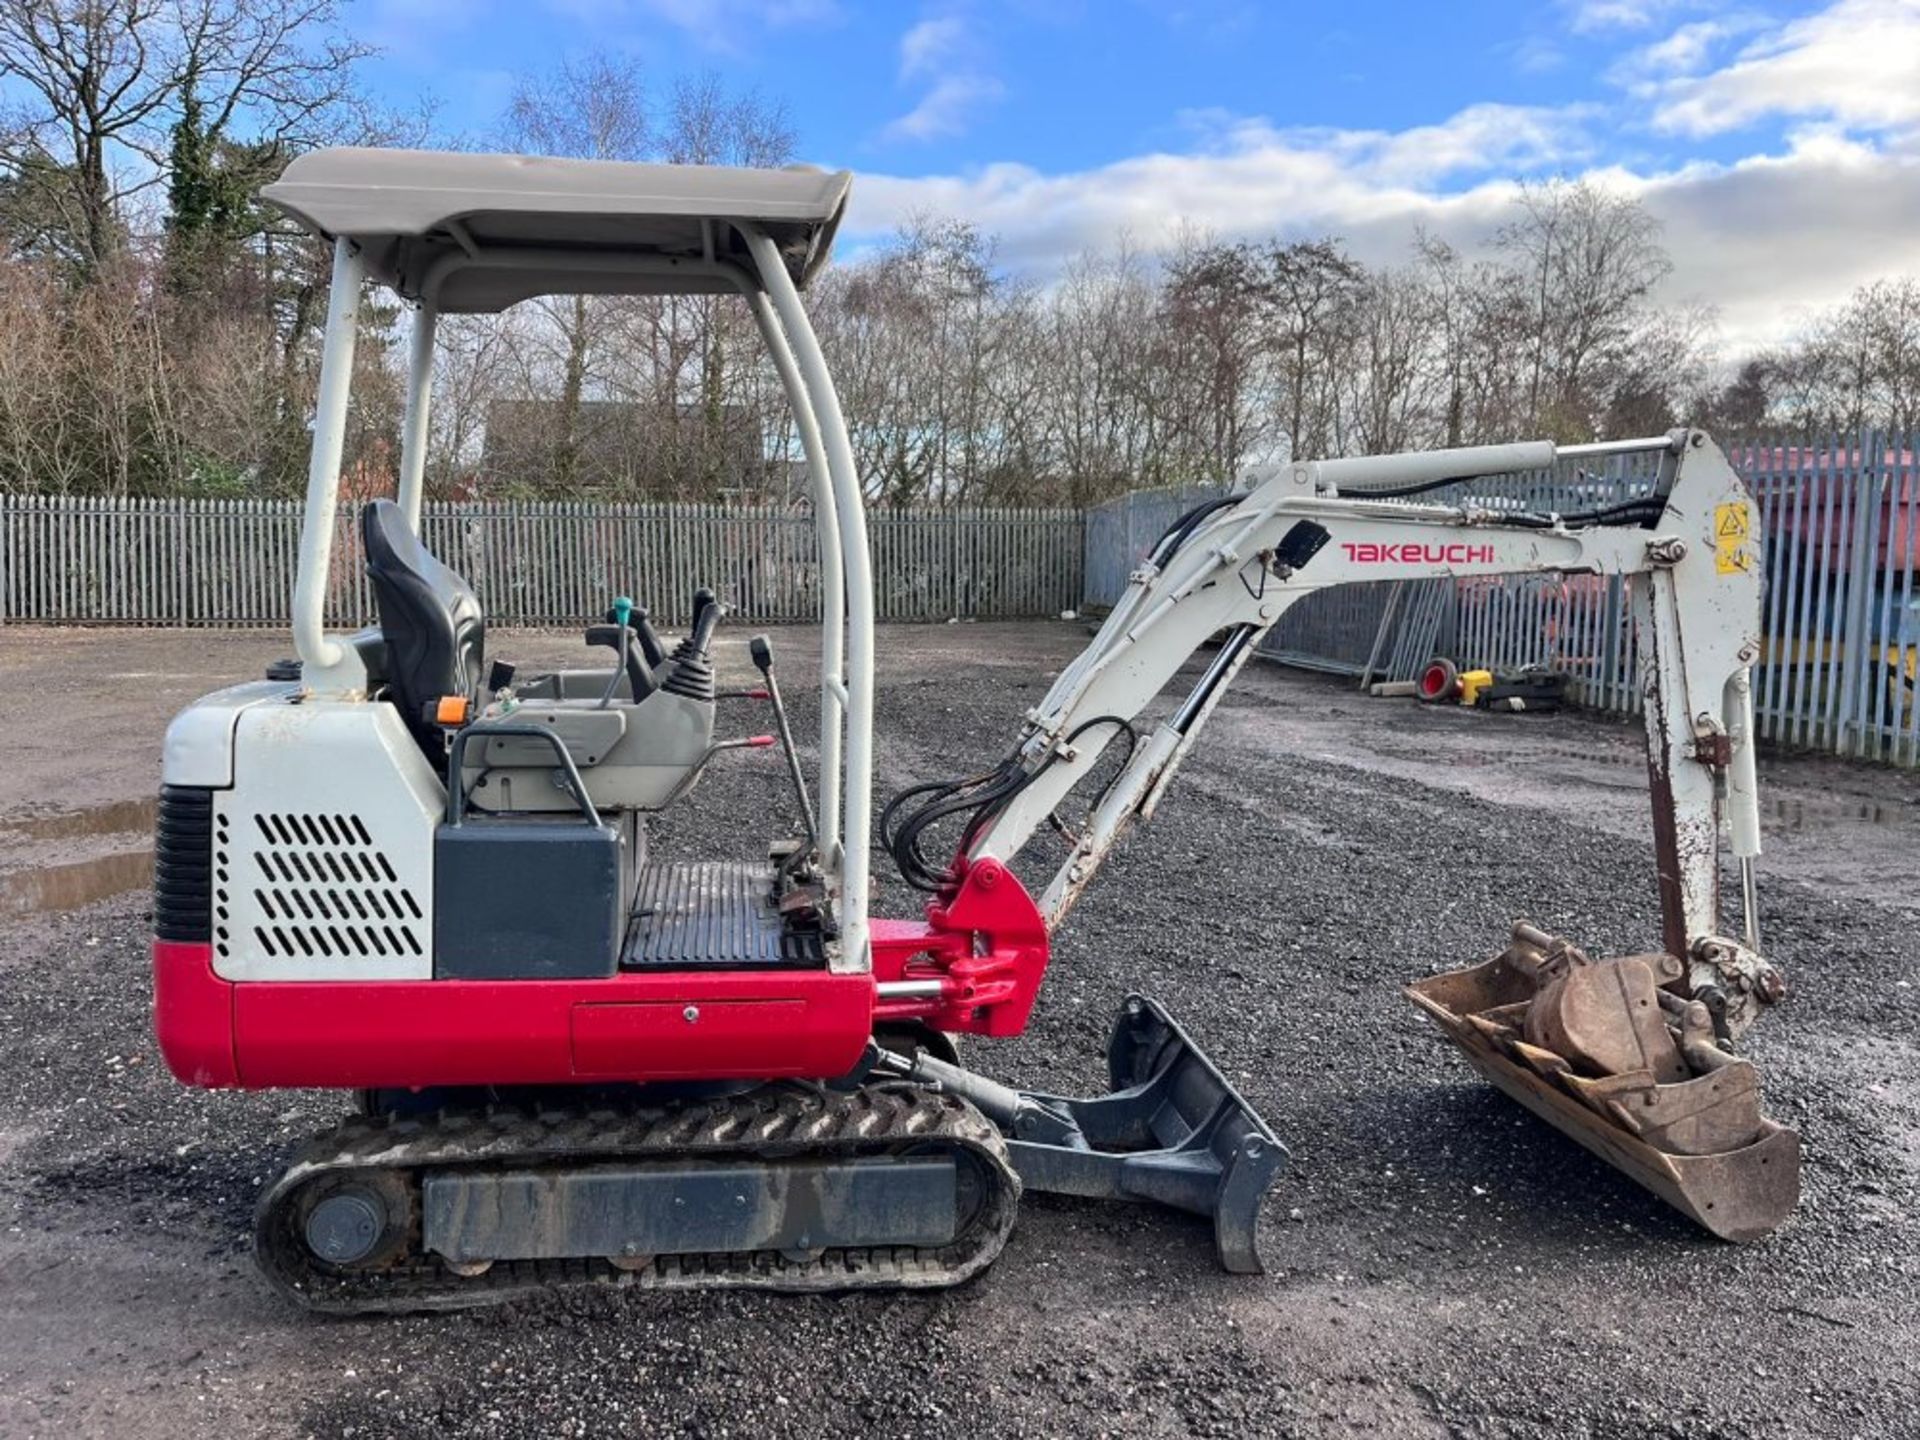 TAKEUCHI TB016 DIGGER 2014 2852HRS C.W QH 4 BUCKETS EXPANDING TRACKS 2 SPEED RTD - Image 5 of 12